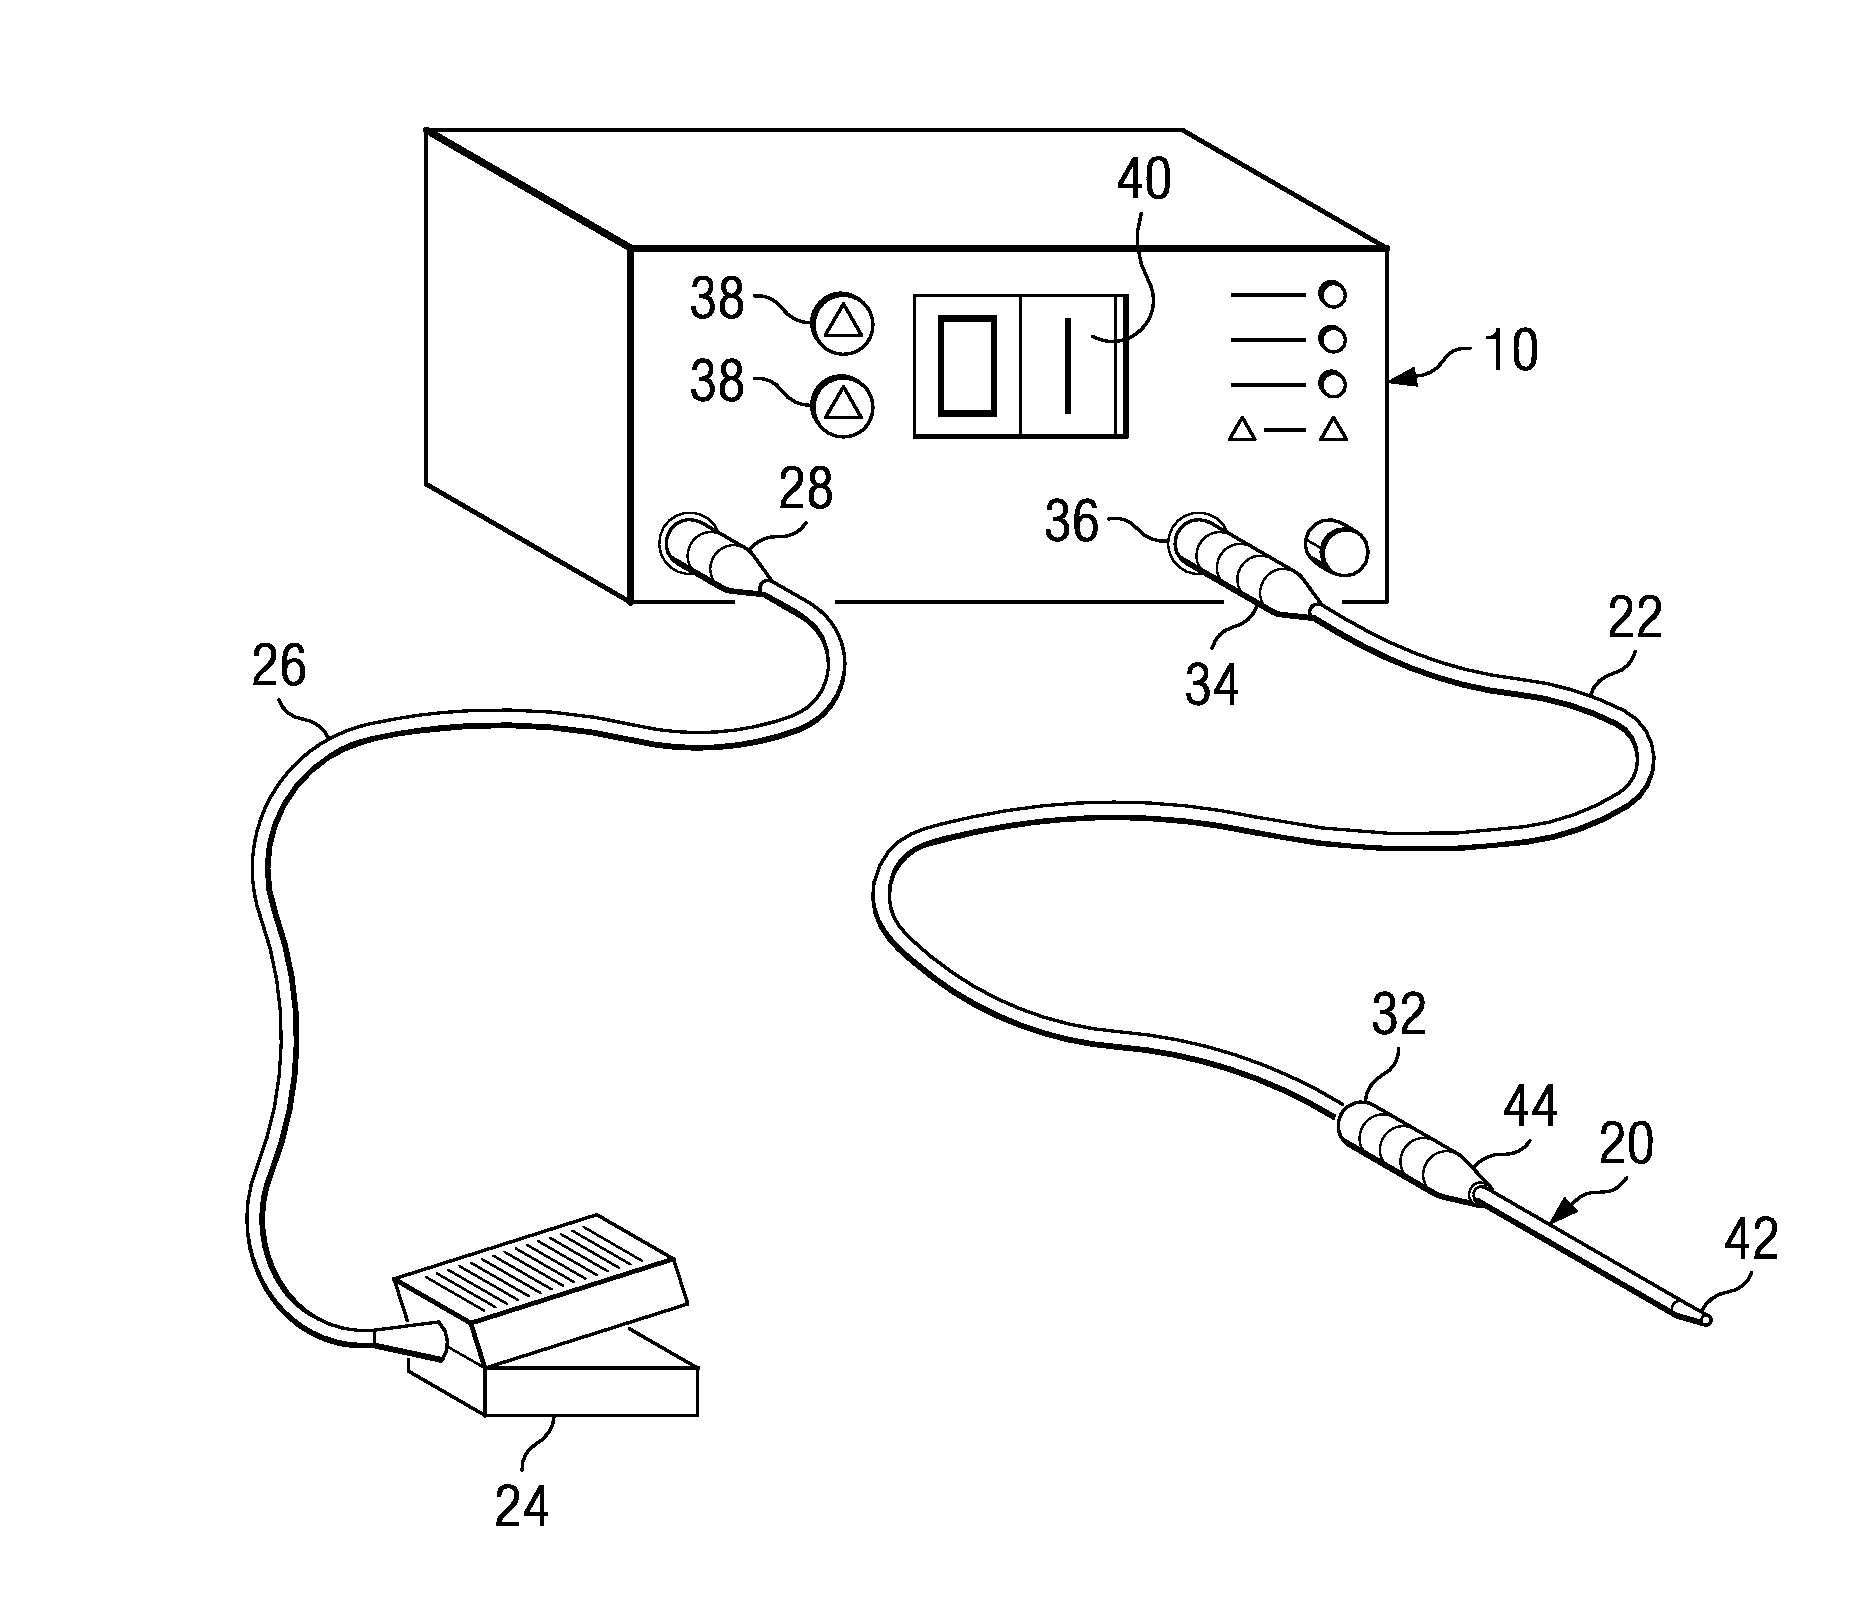 Ablation performance indicator for electrosurgical devices